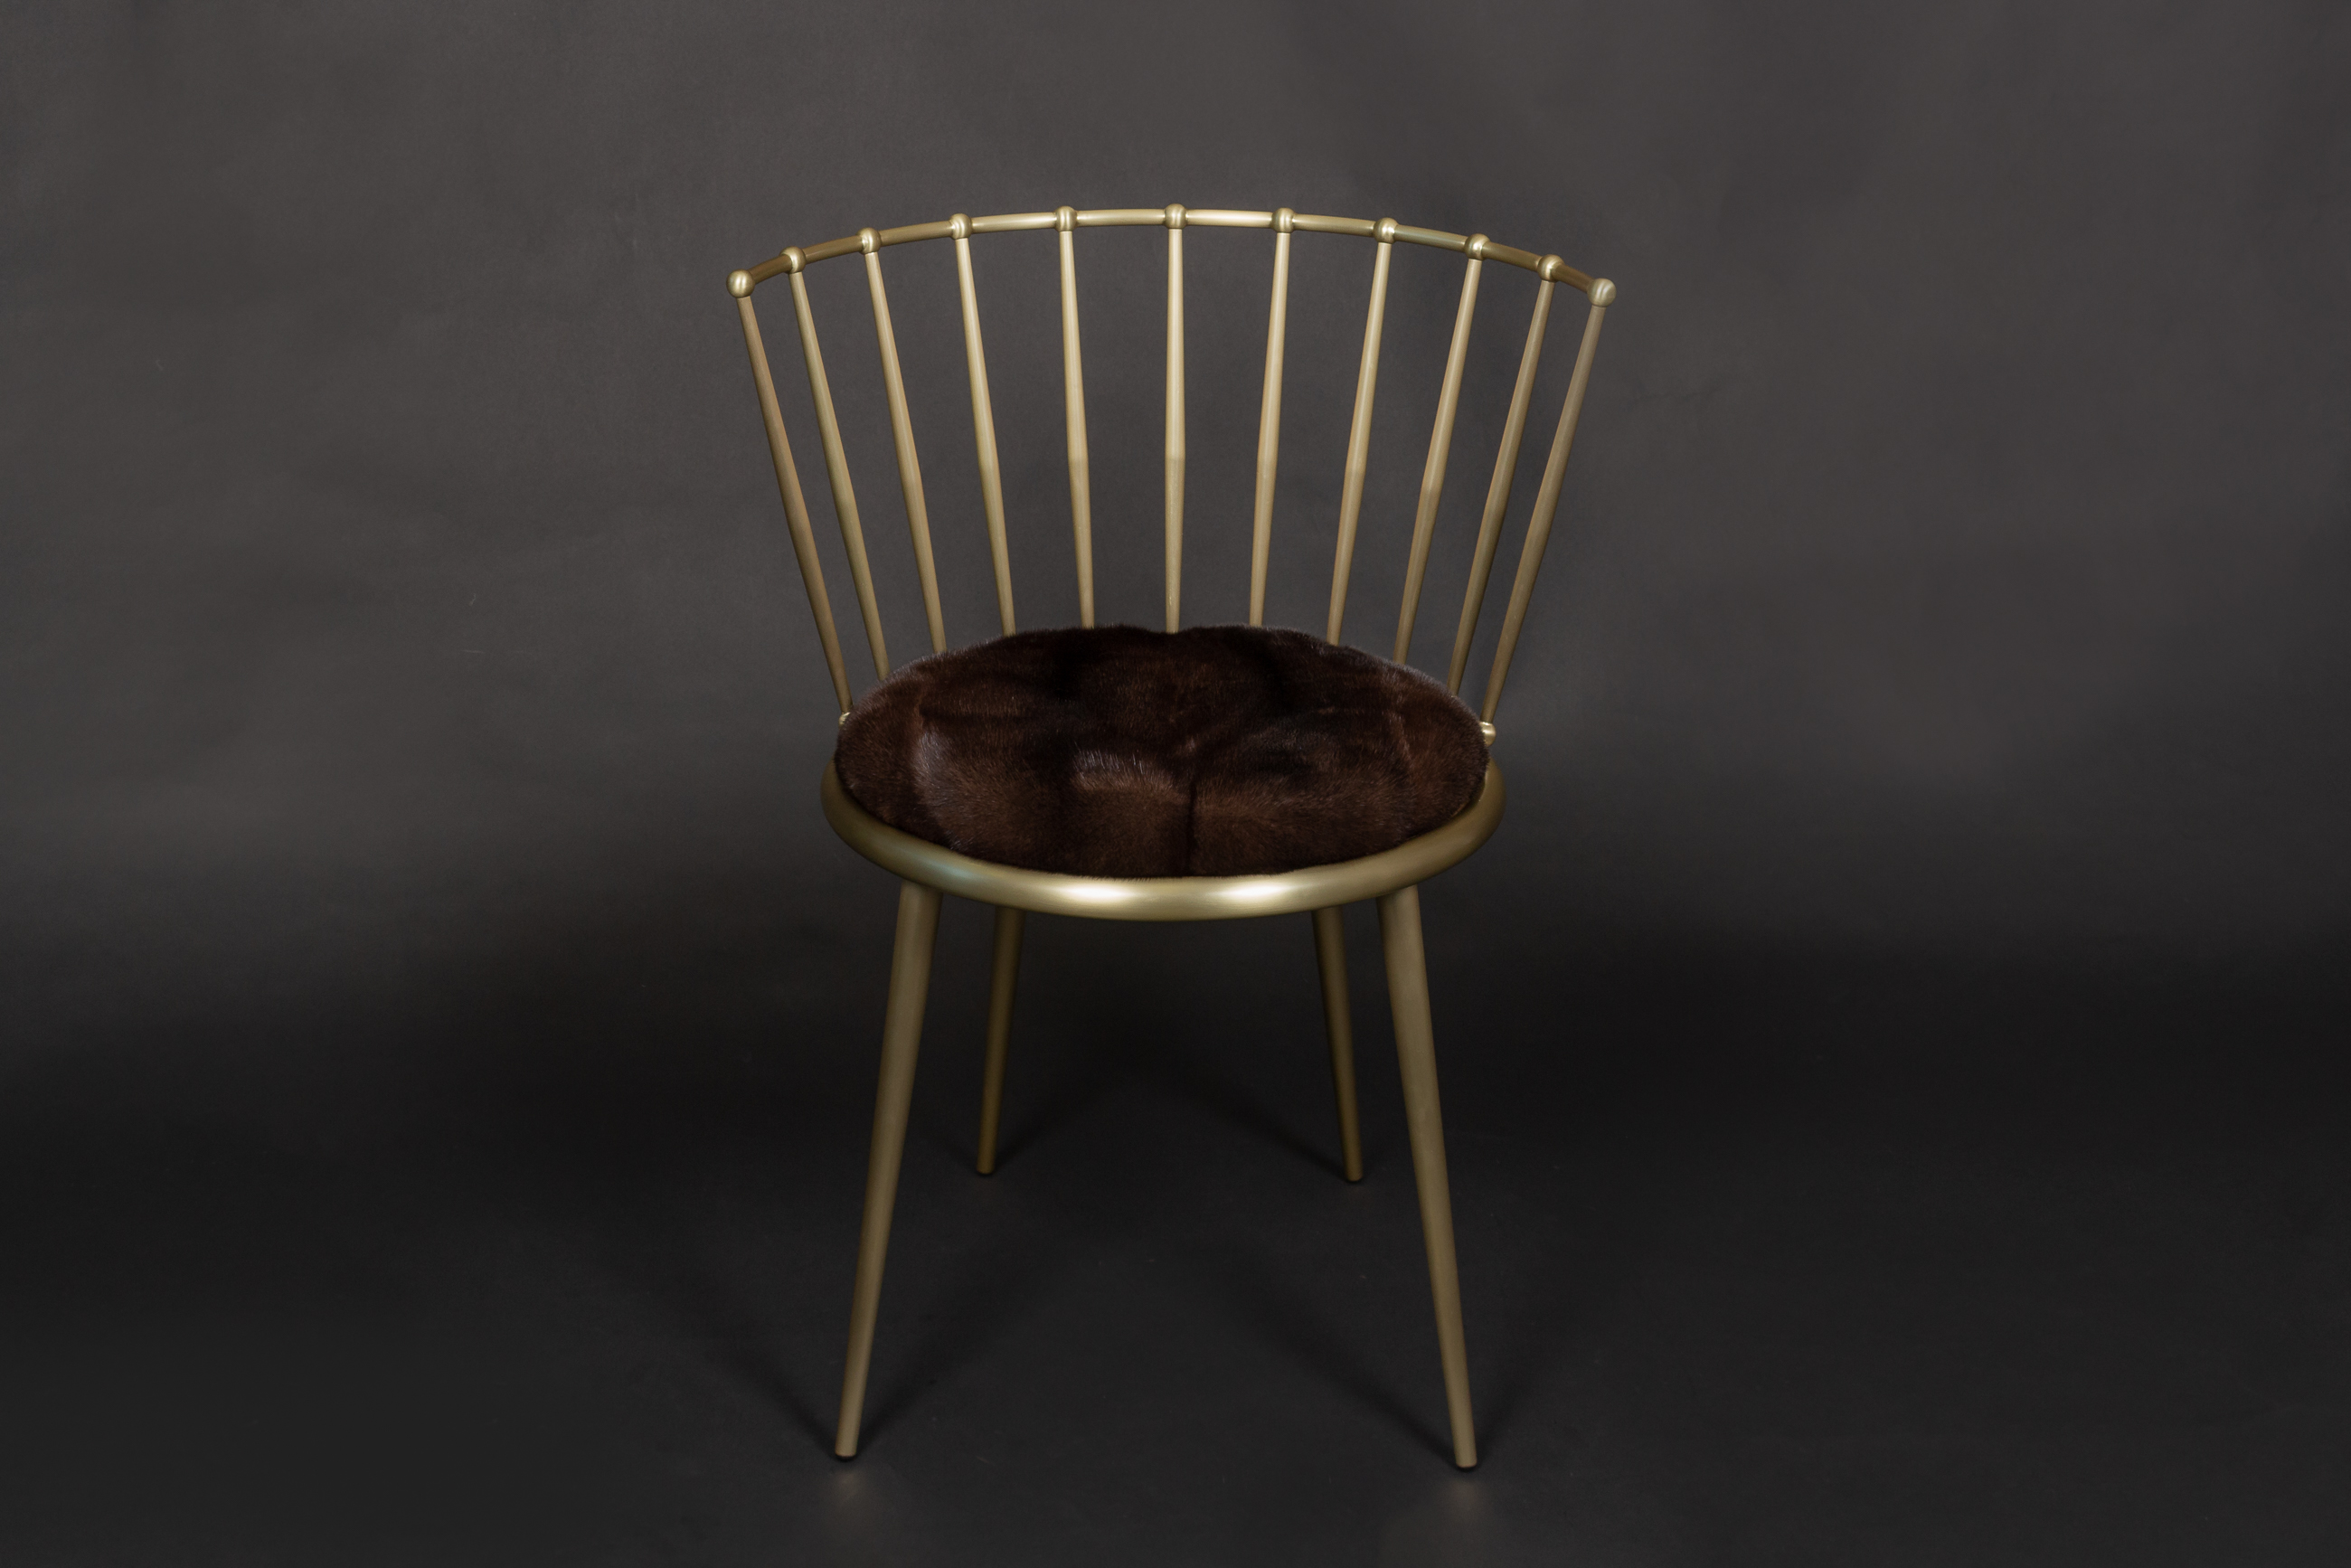 Mink Chair with Mahogany Mink Skins